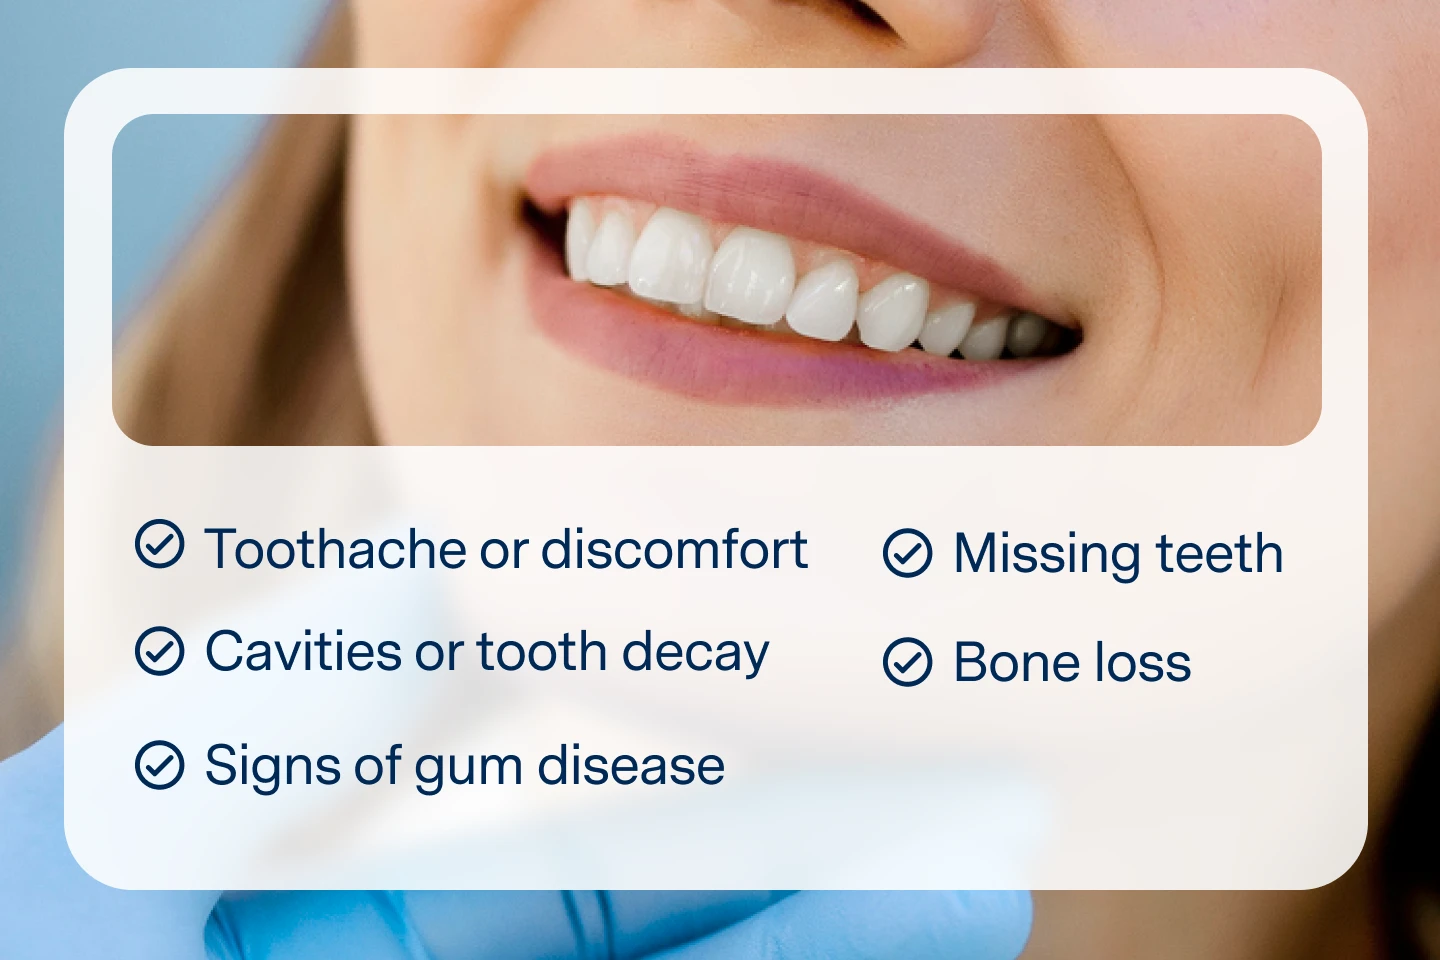 Restorative dental treatments and procedures should be considered if you have damaged or decayed teeth, missing teeth, or if you're experiencing pain or discomfort in your mouth. Additionally, if you notice changes in your bite or have difficulty chewing or speaking, restorative treatments may be necessary.